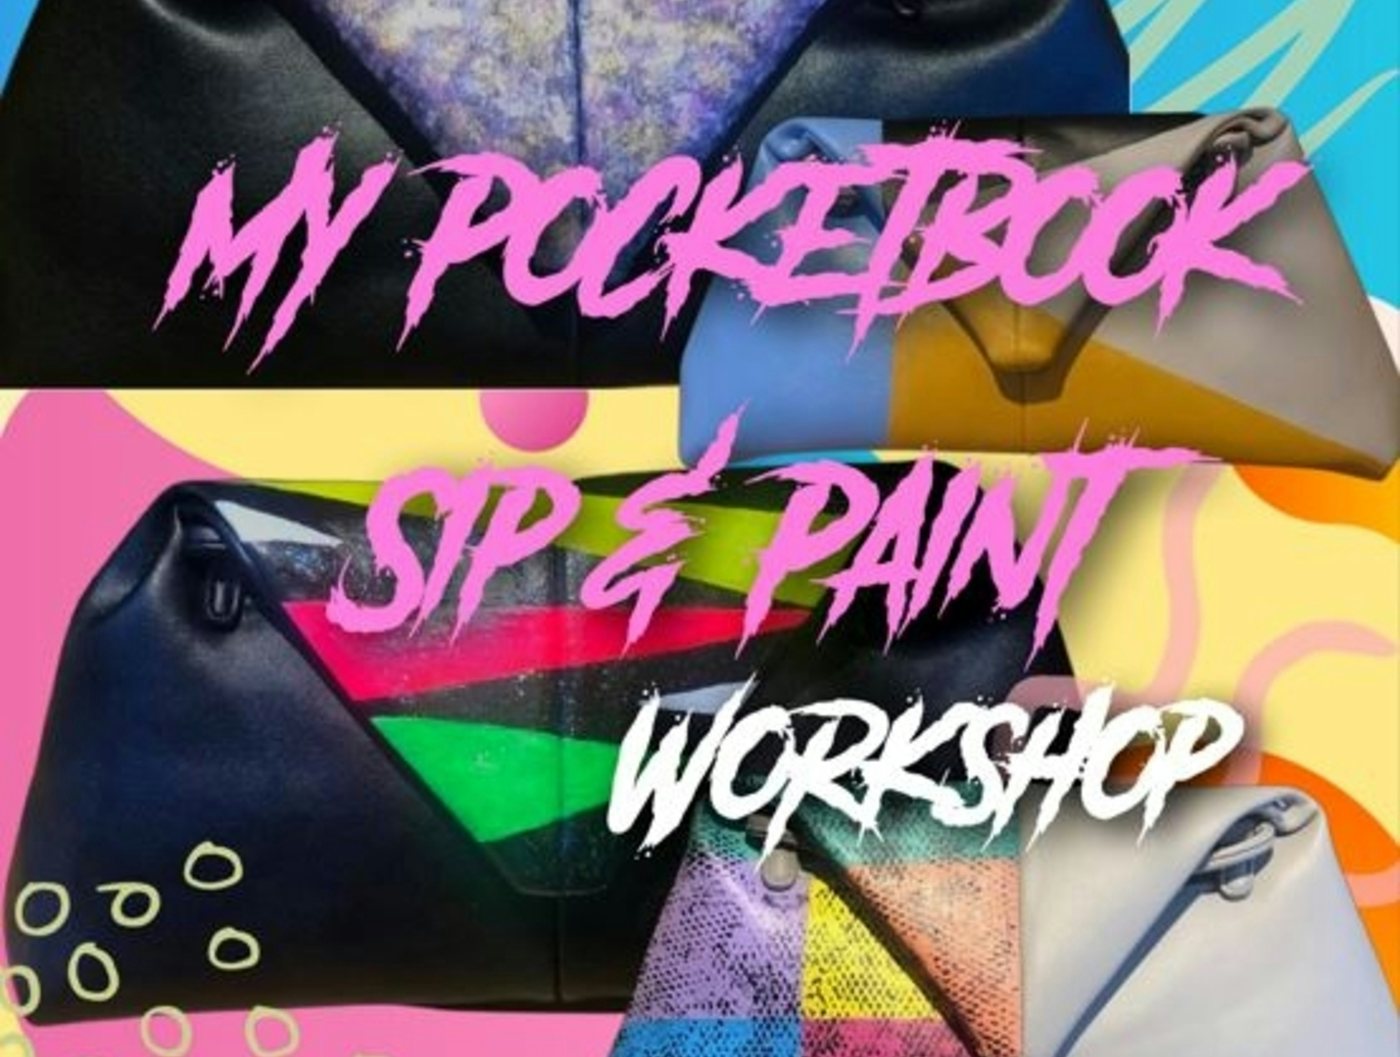 My Pocketbook: Sip and Paint Workshop